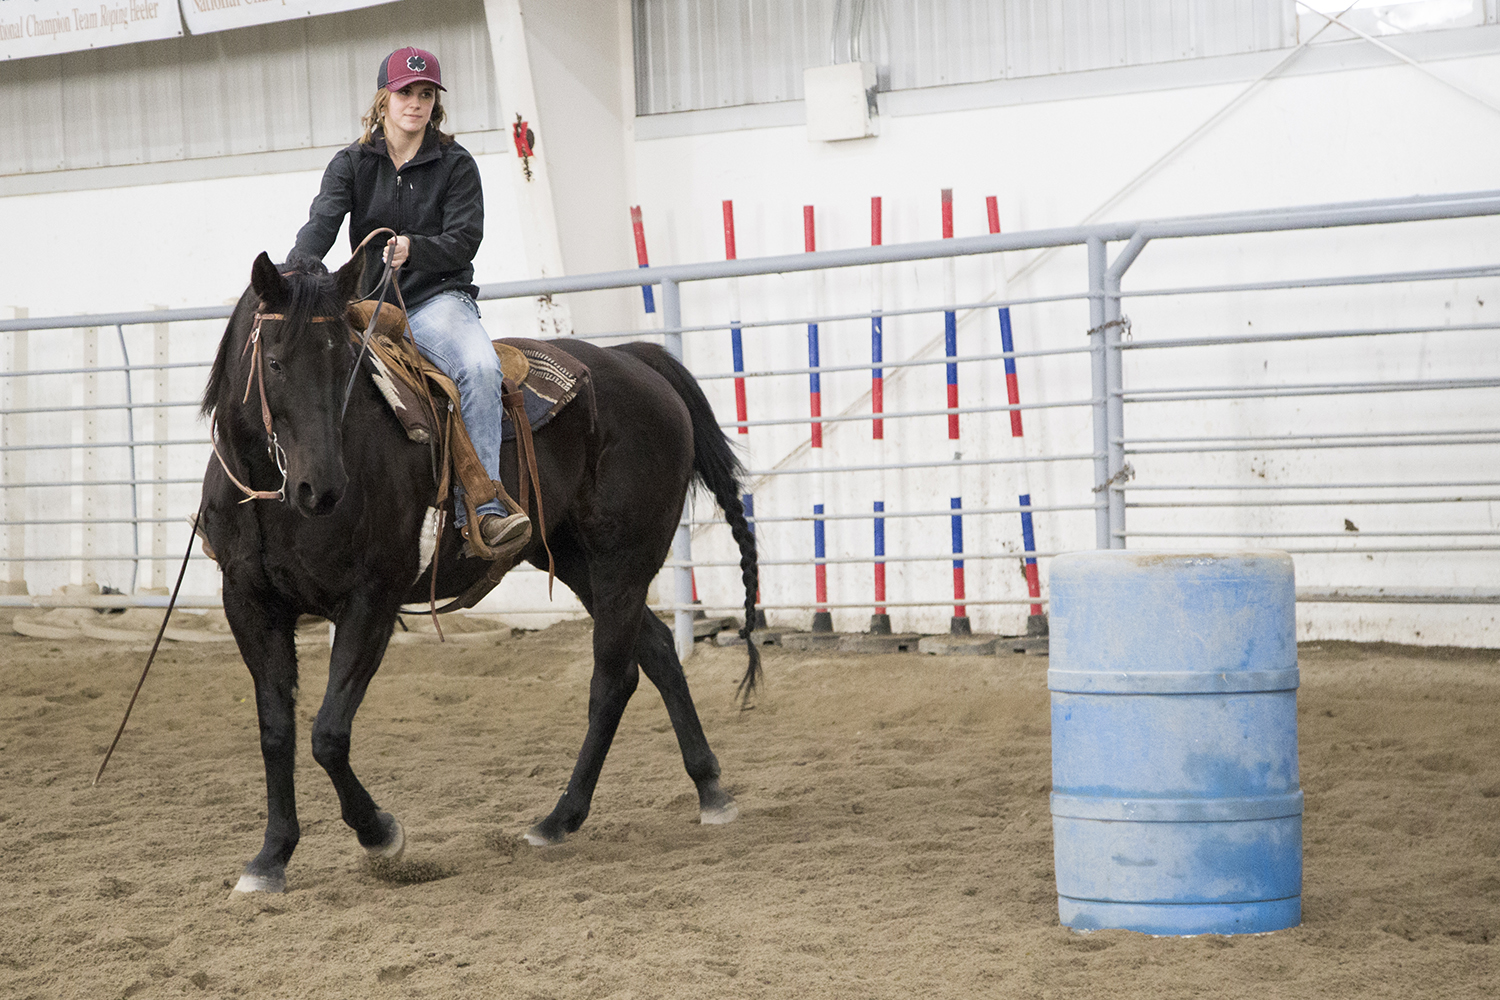 CWC student rides her horse around a barrel for a barrel clinic class